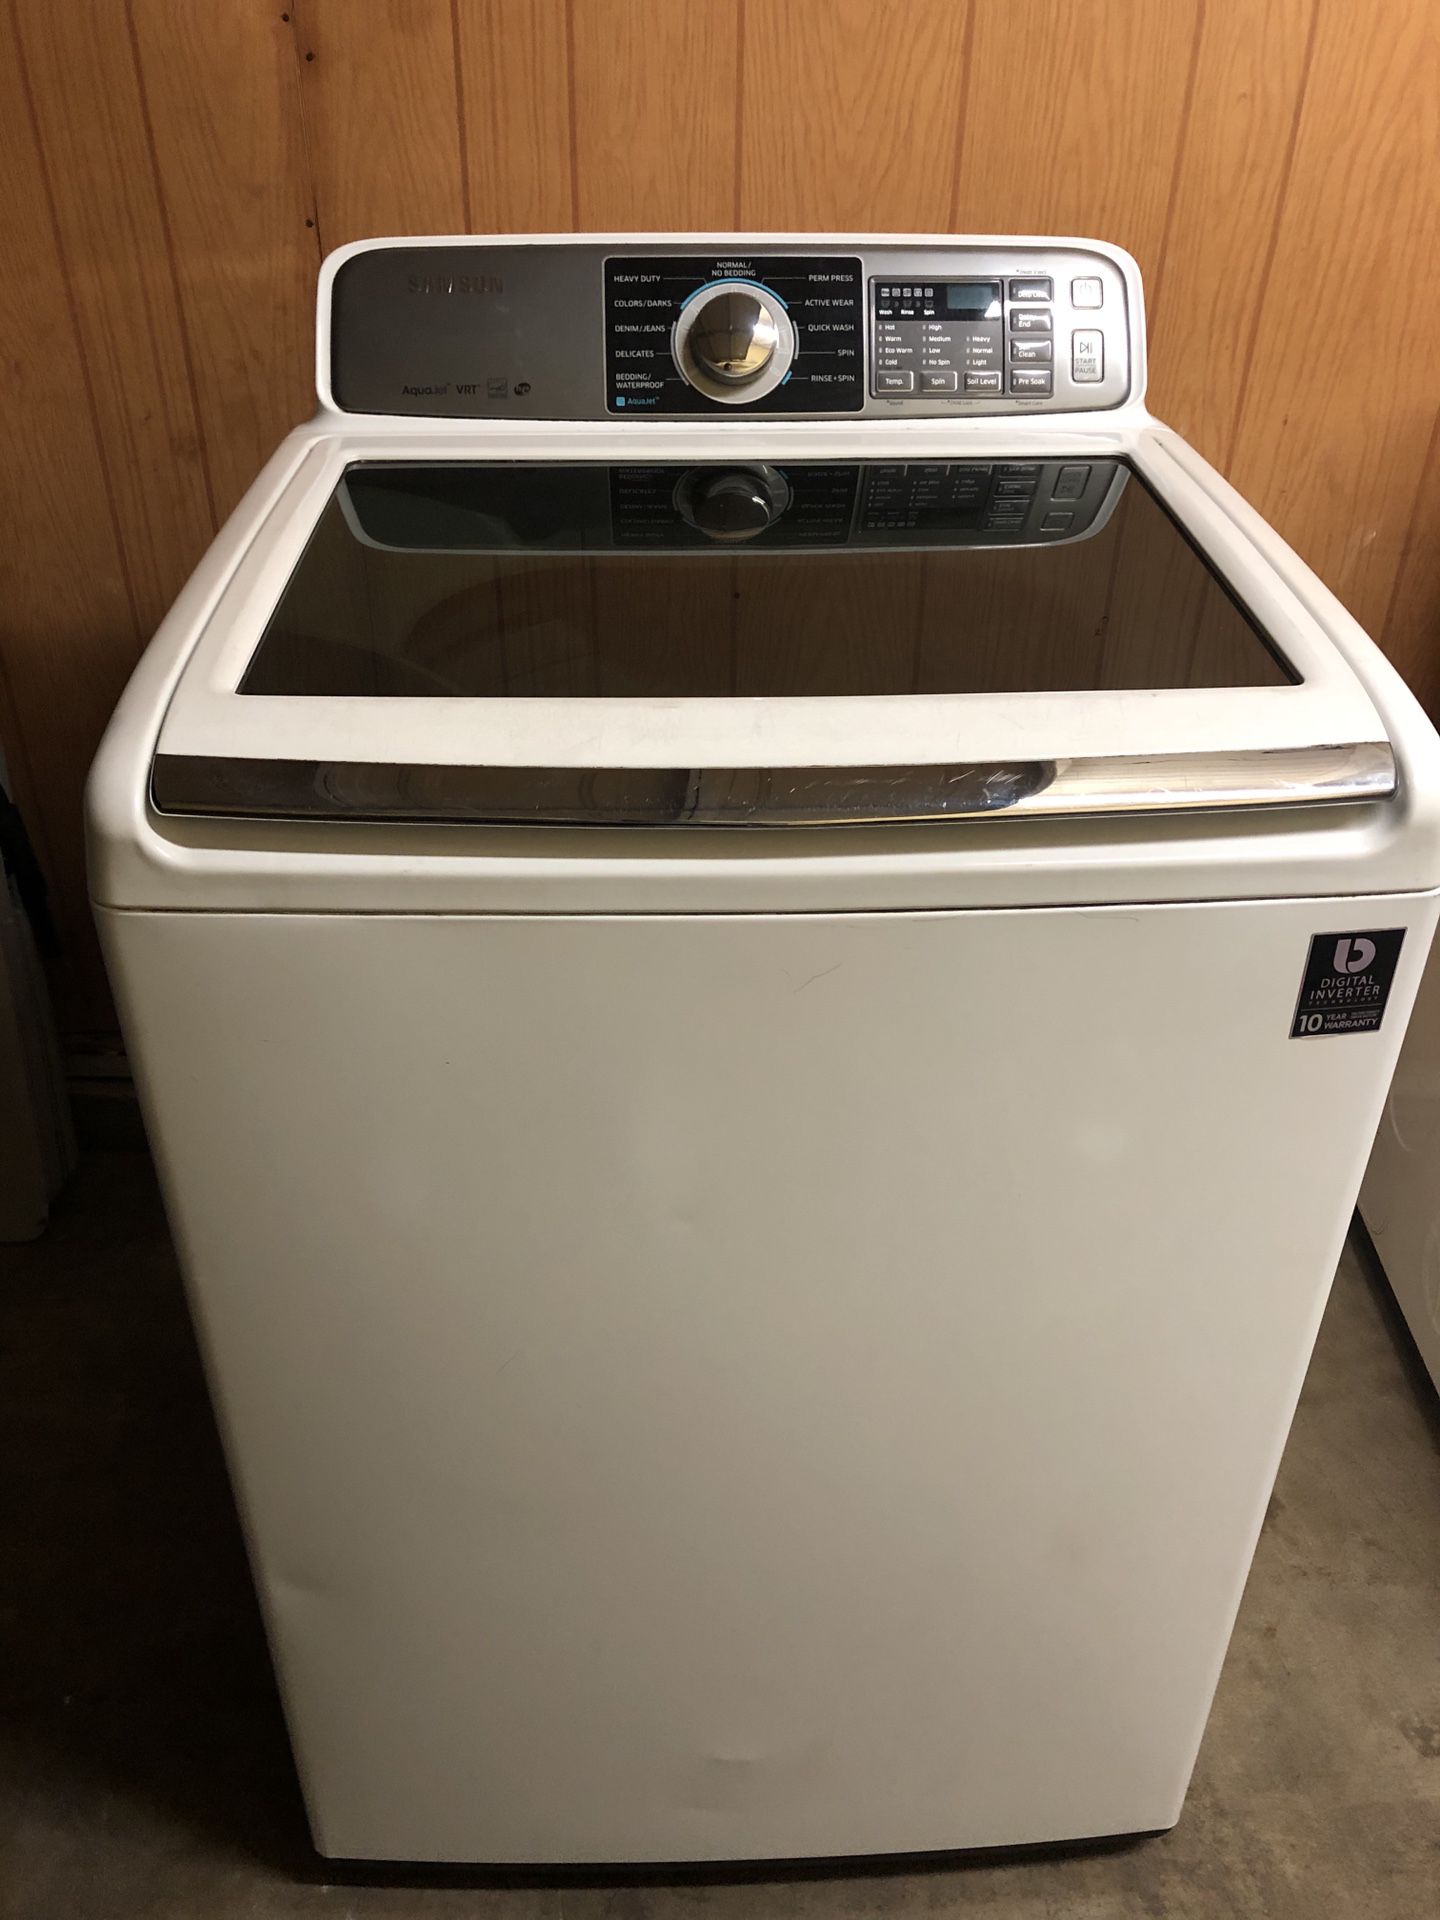 Samsung washer top load